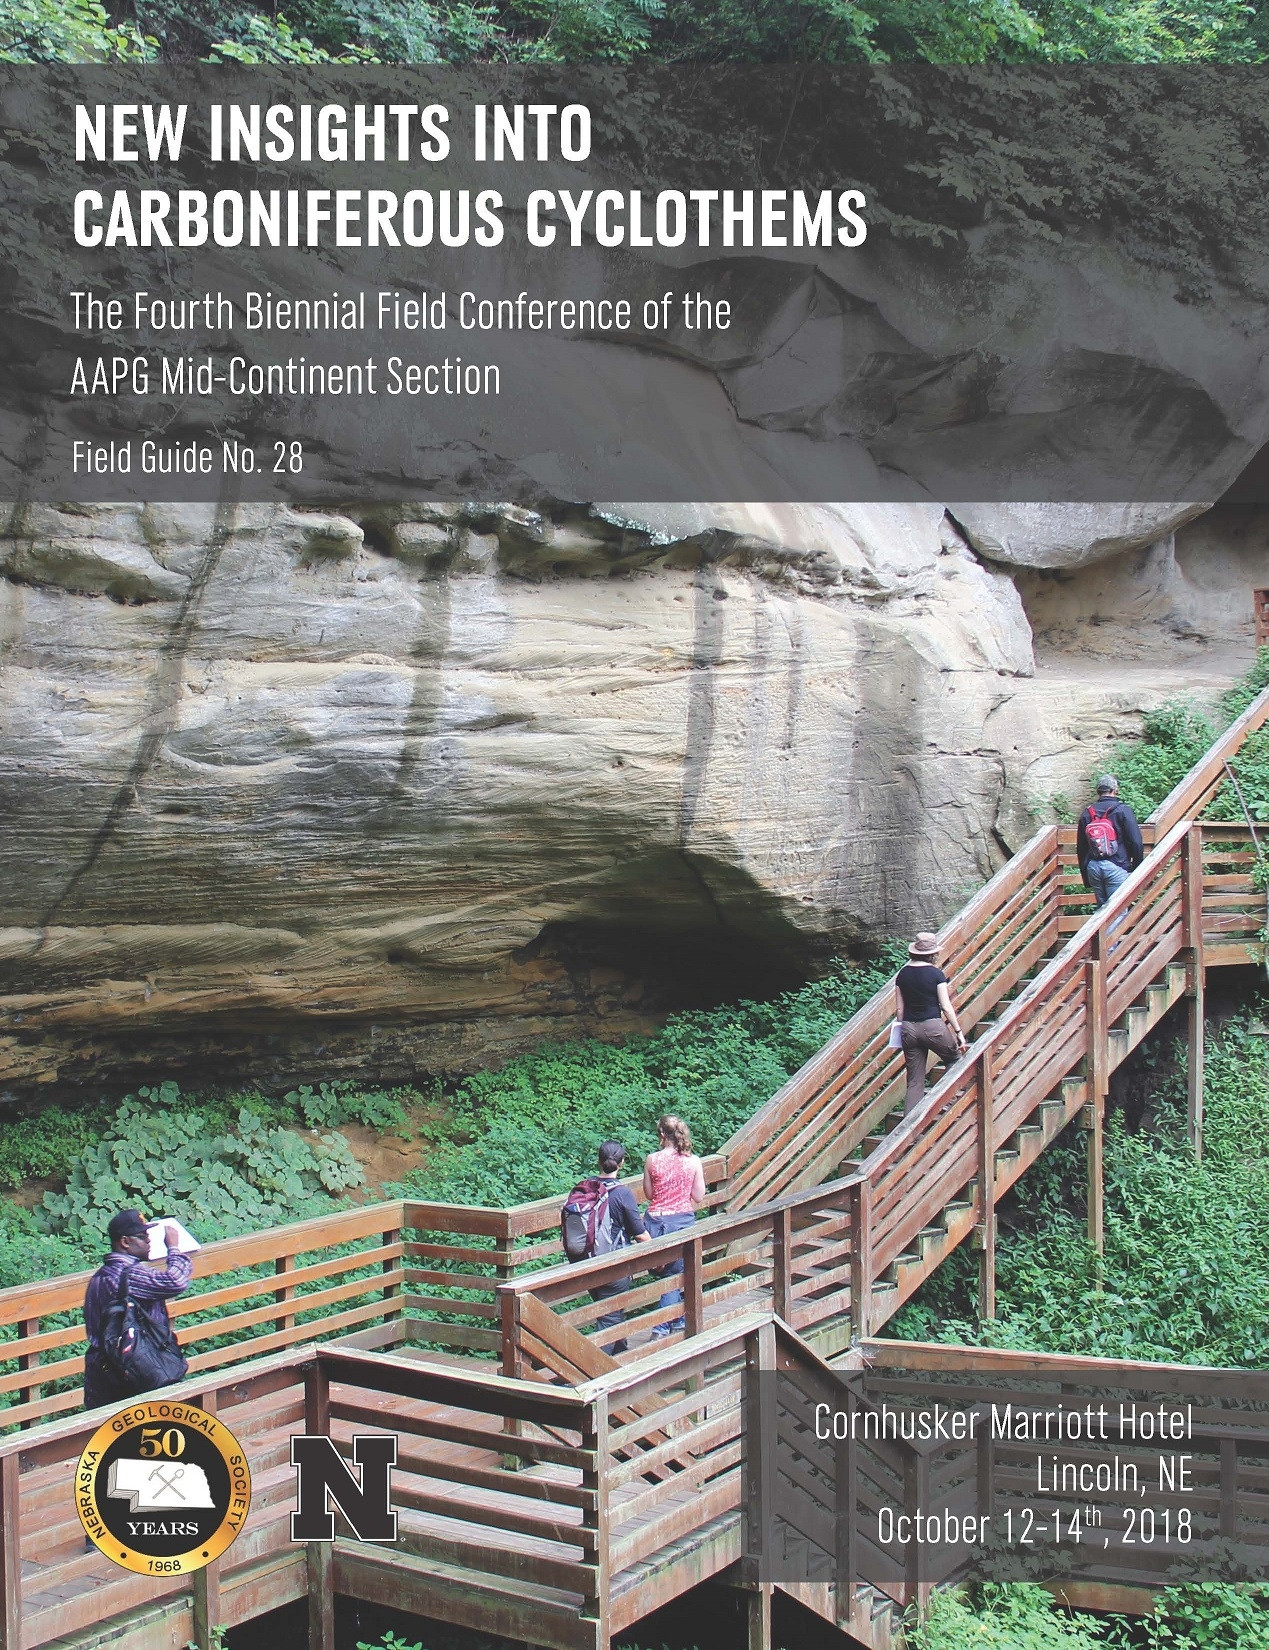 New Insights into Carboniferous Cyclothems.  The Fourth Biennial Field Conference of the American Association of Petroleum Geologists (AAPG) Midcontinent Section Fourth Biennial Field Conference Abstracts and Guidebook (FG-28). pp. 67.  Perfect bound pape